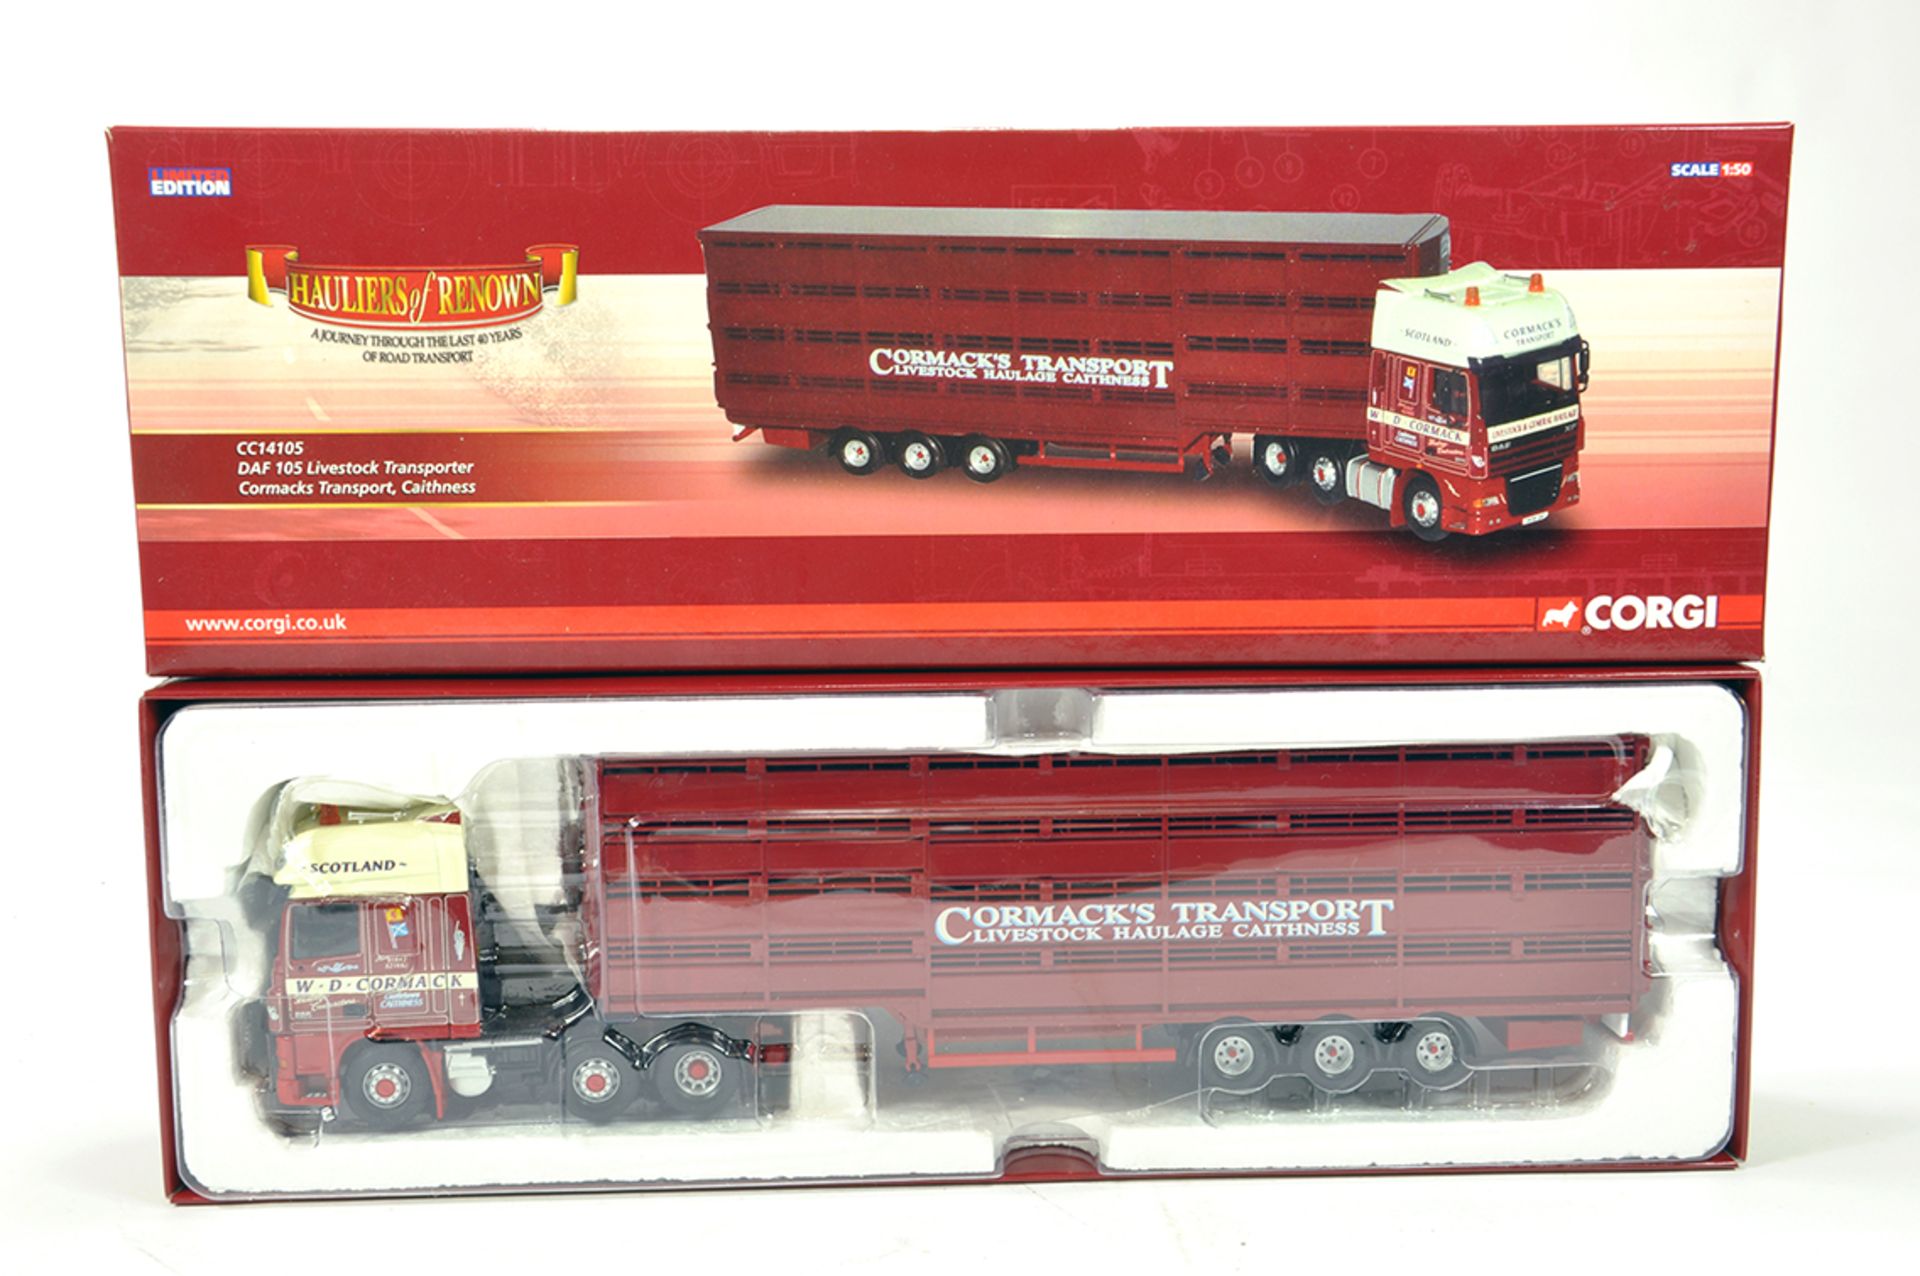 Corgi 1/50 Diecast Truck Issue Comprising CC14105 DAF 105 Livestock Trailer in livery of Cormacks.